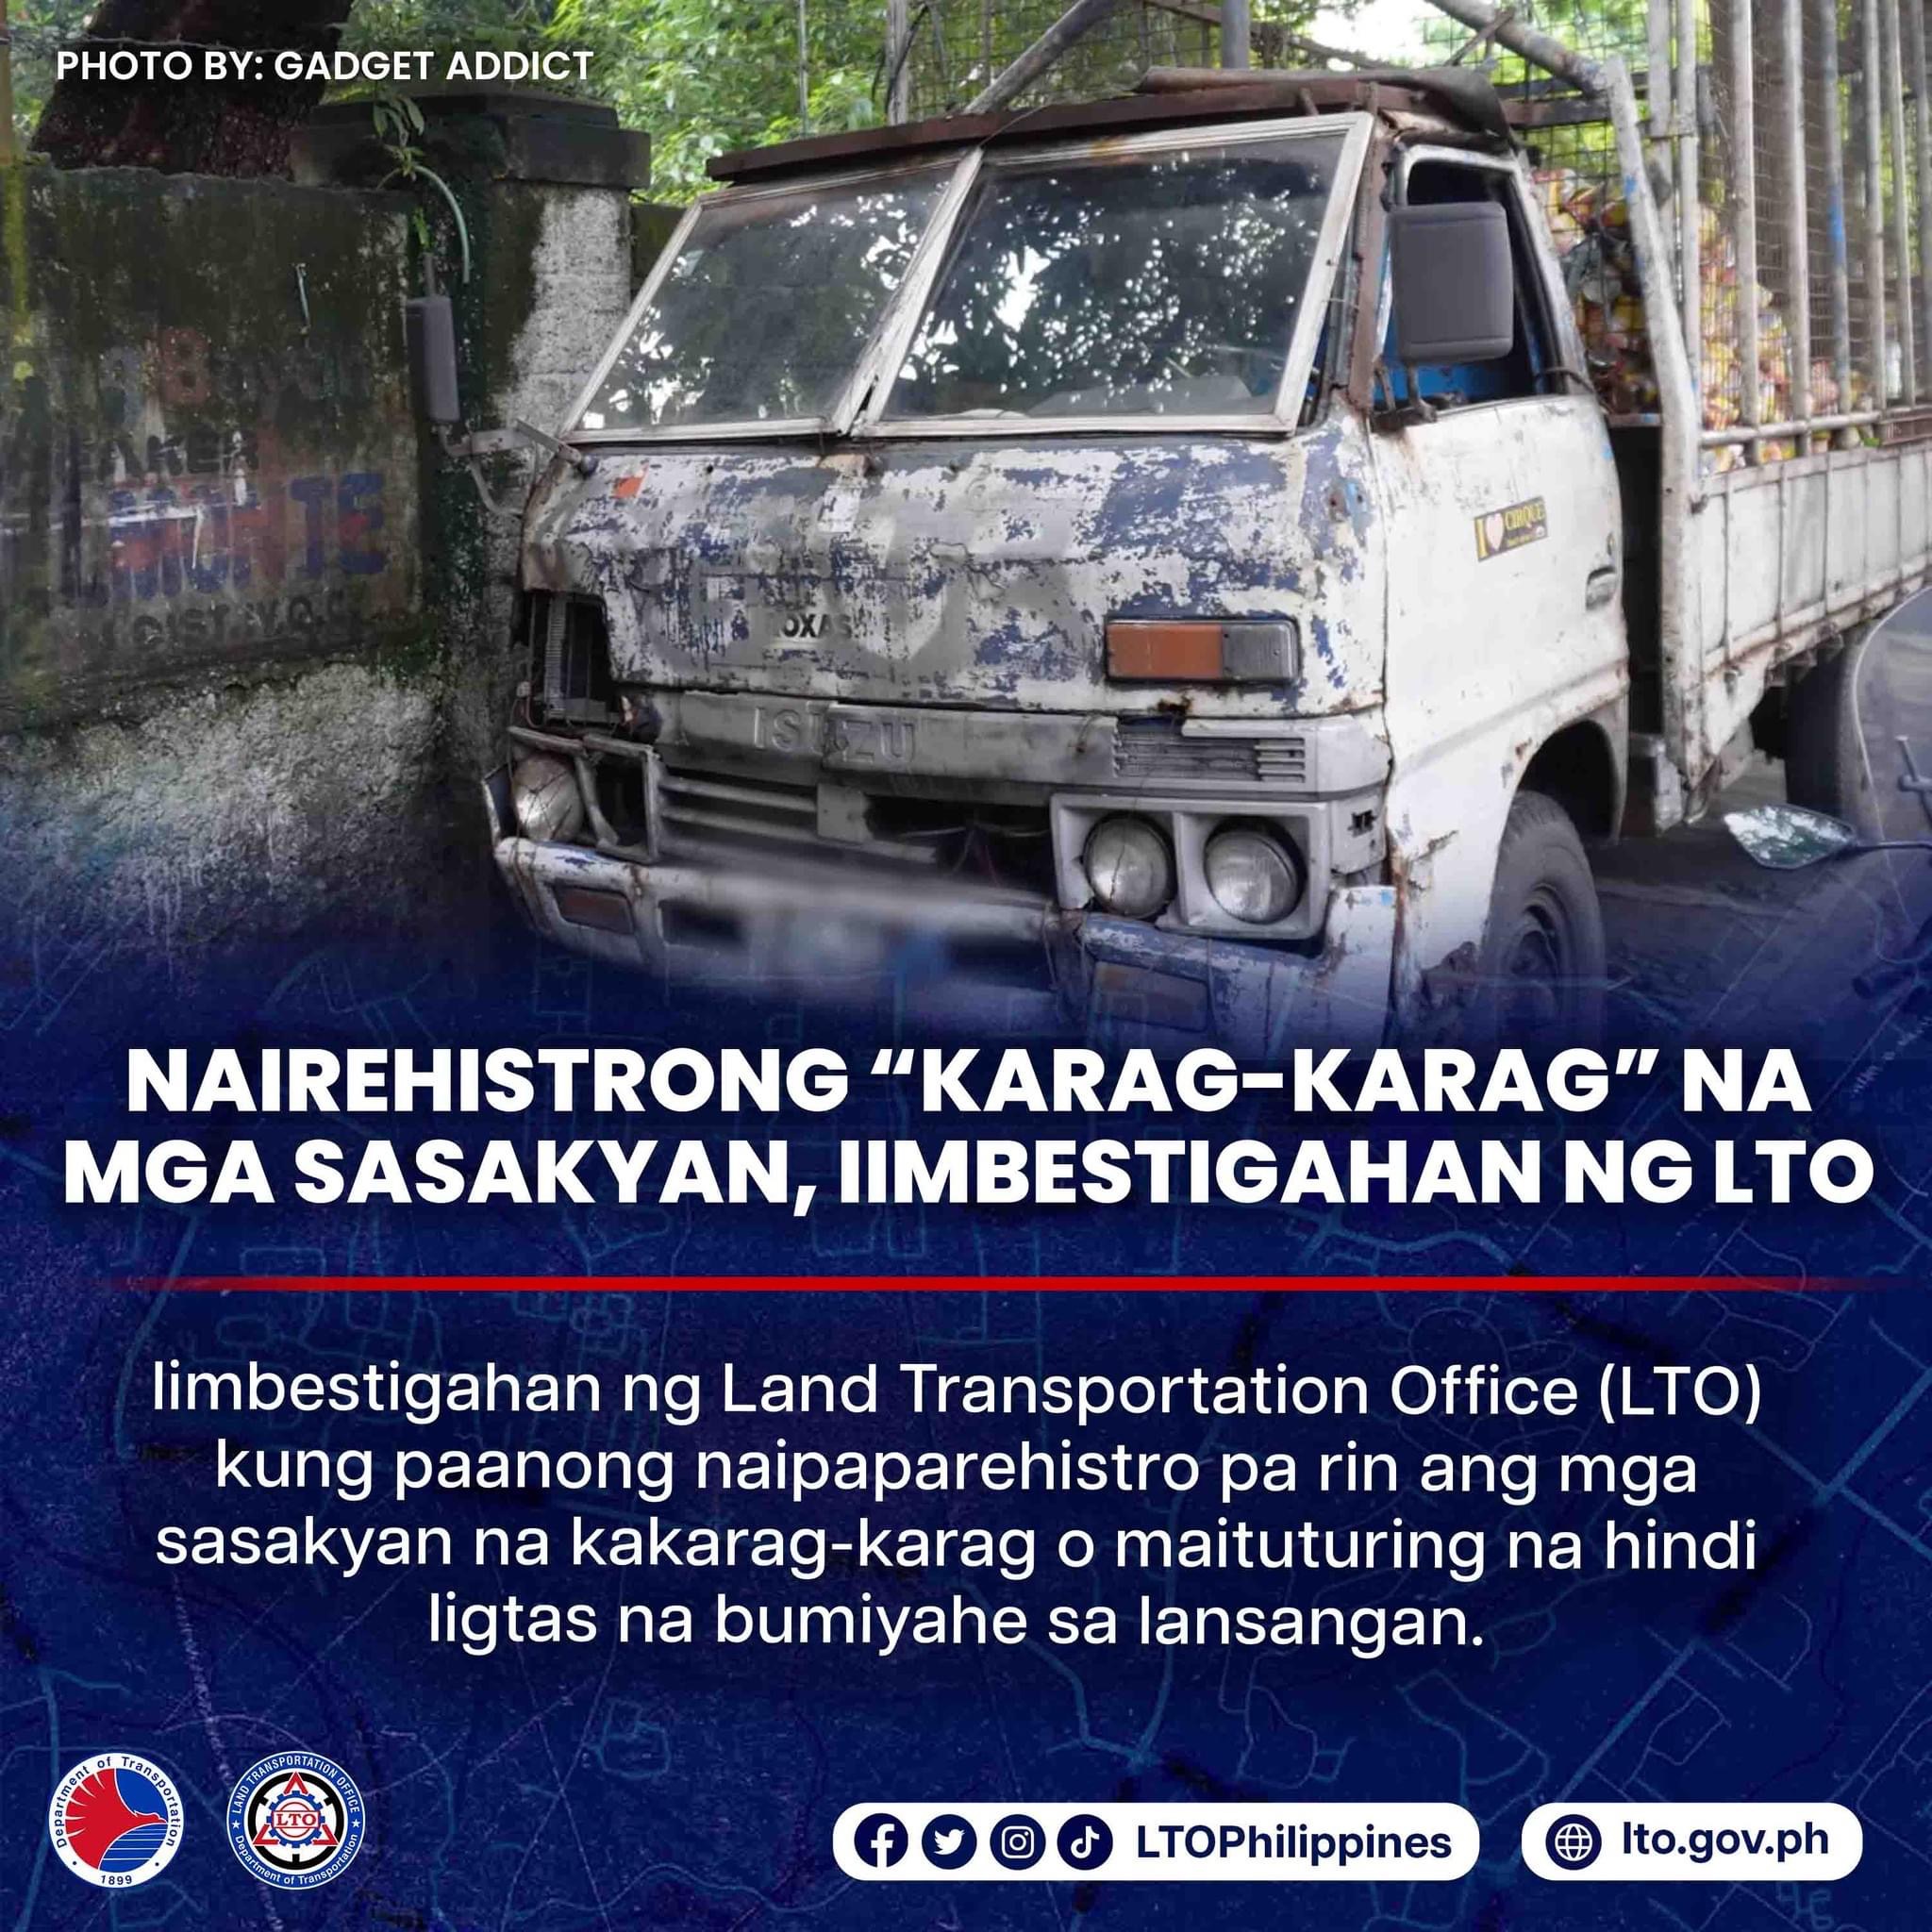 Paano Nakalusot: LTO To Probe Registration of Junk, Unsafe Vehicles